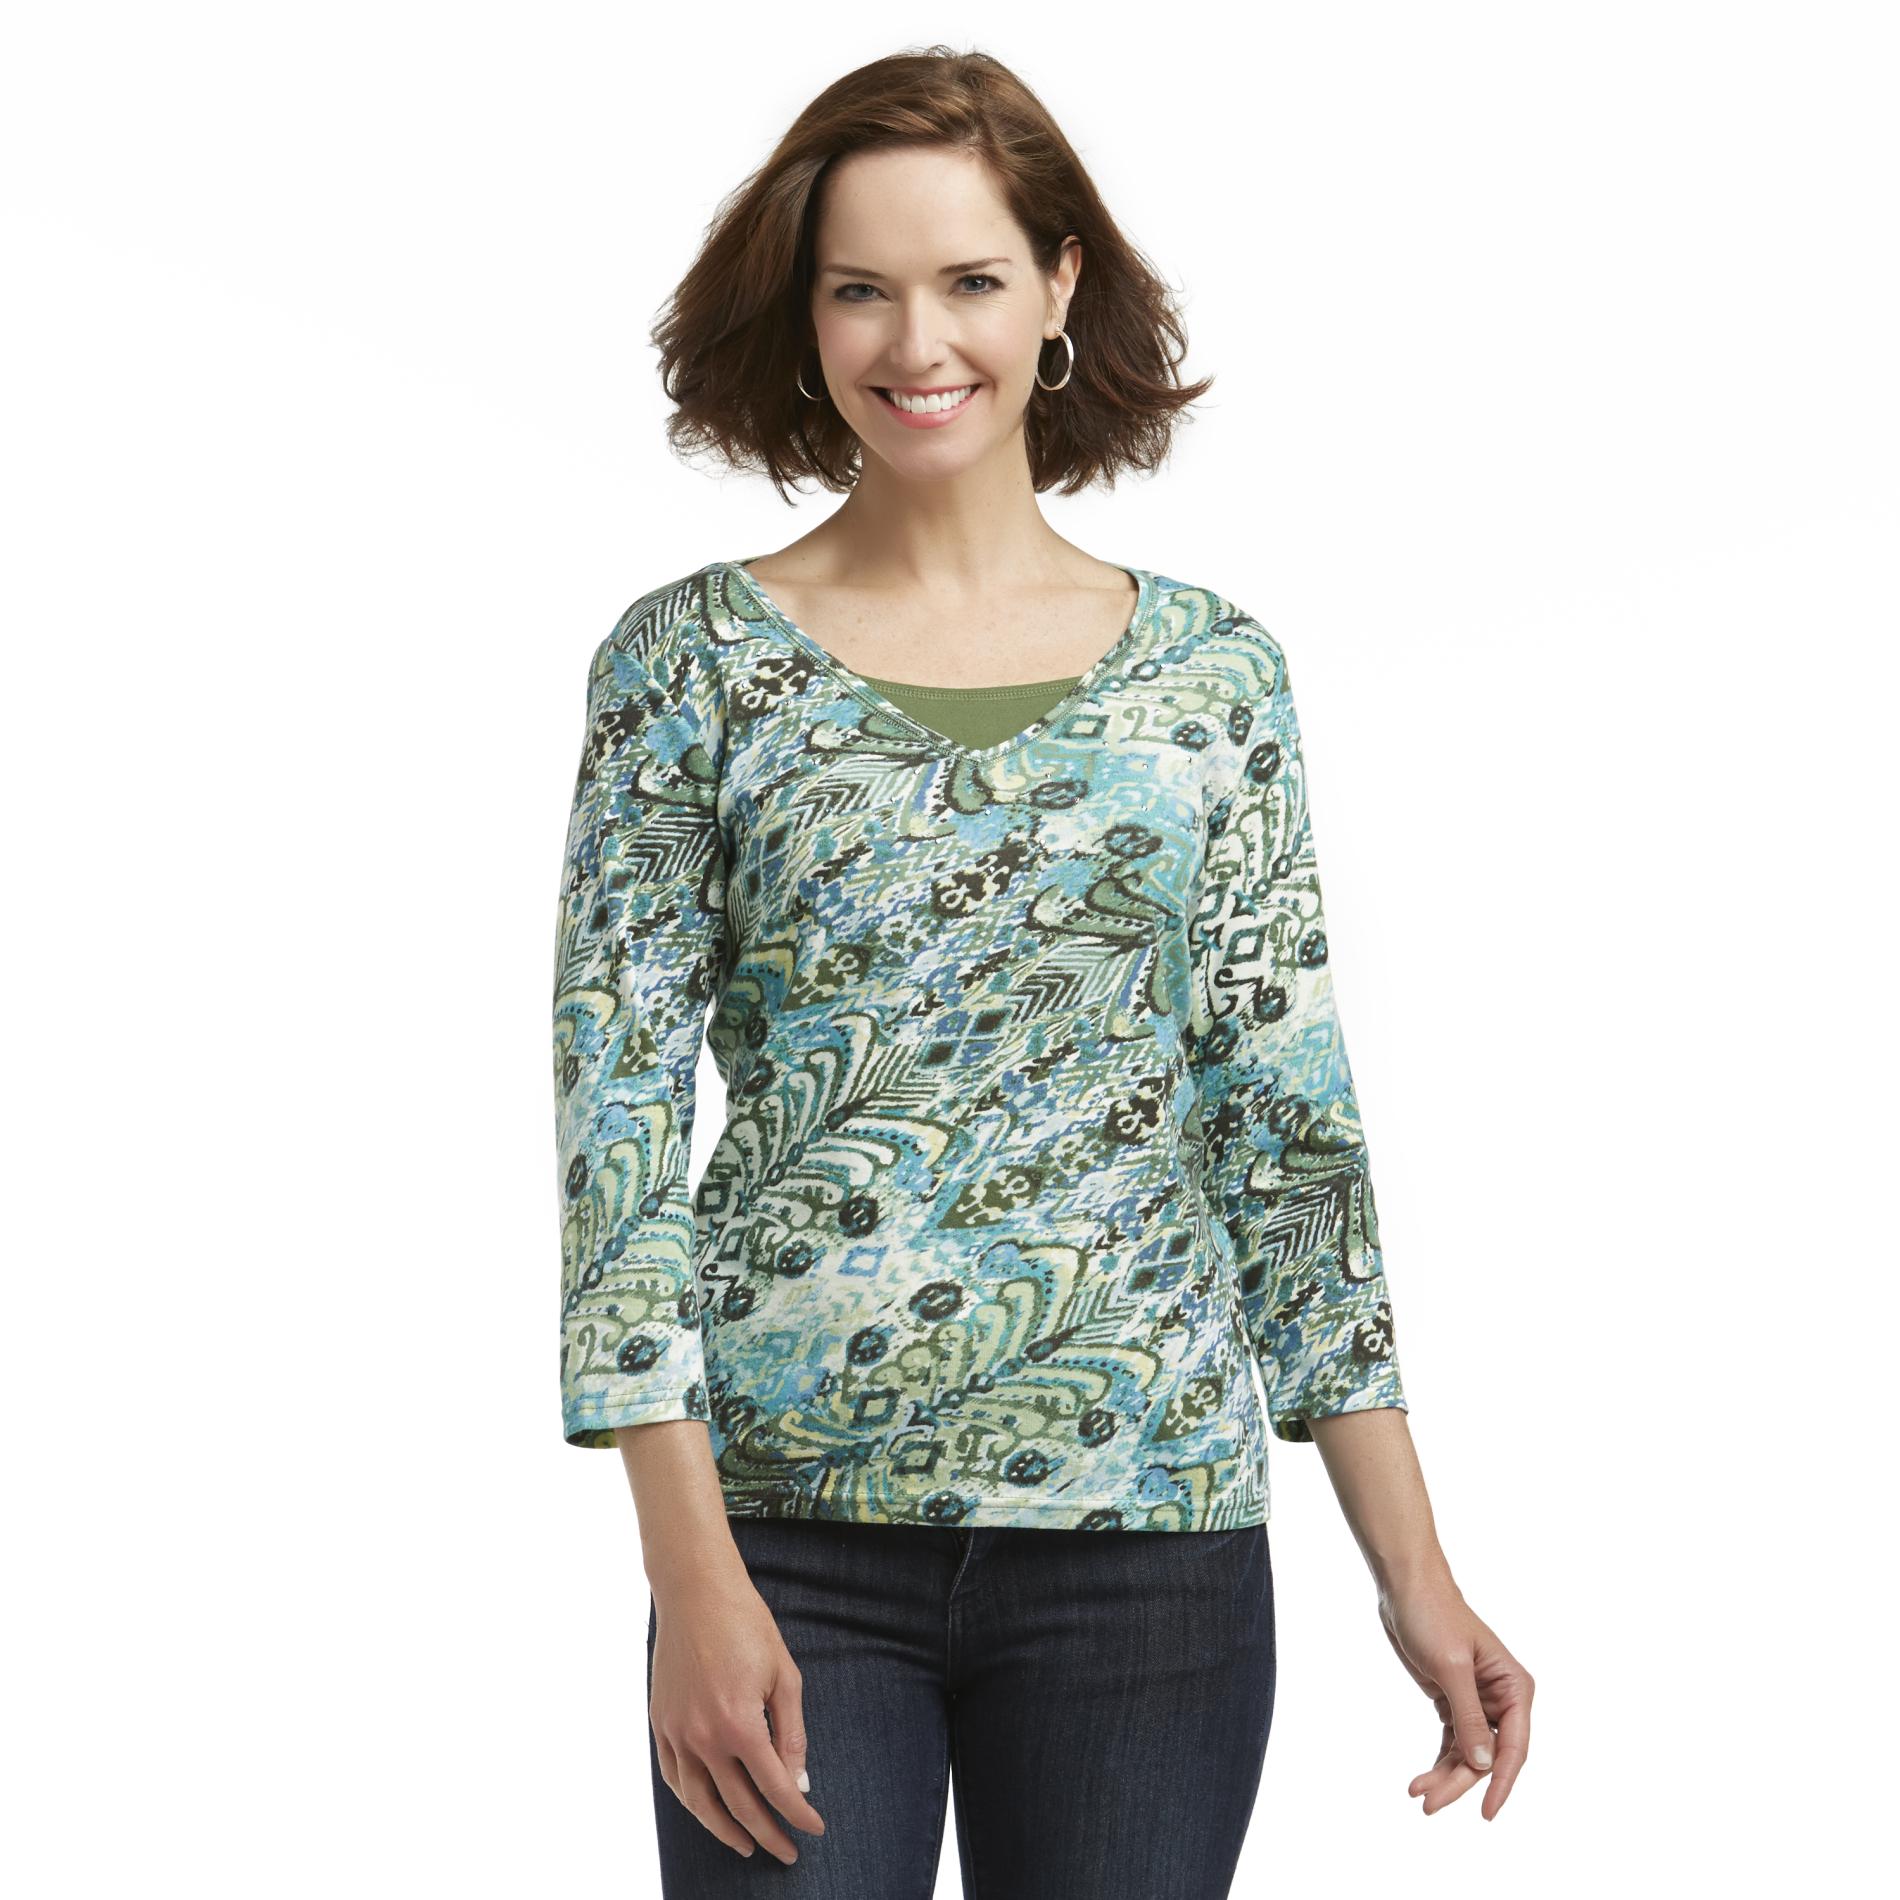 Basic Editions Women's Layered-Look Embellished Top - Abstract